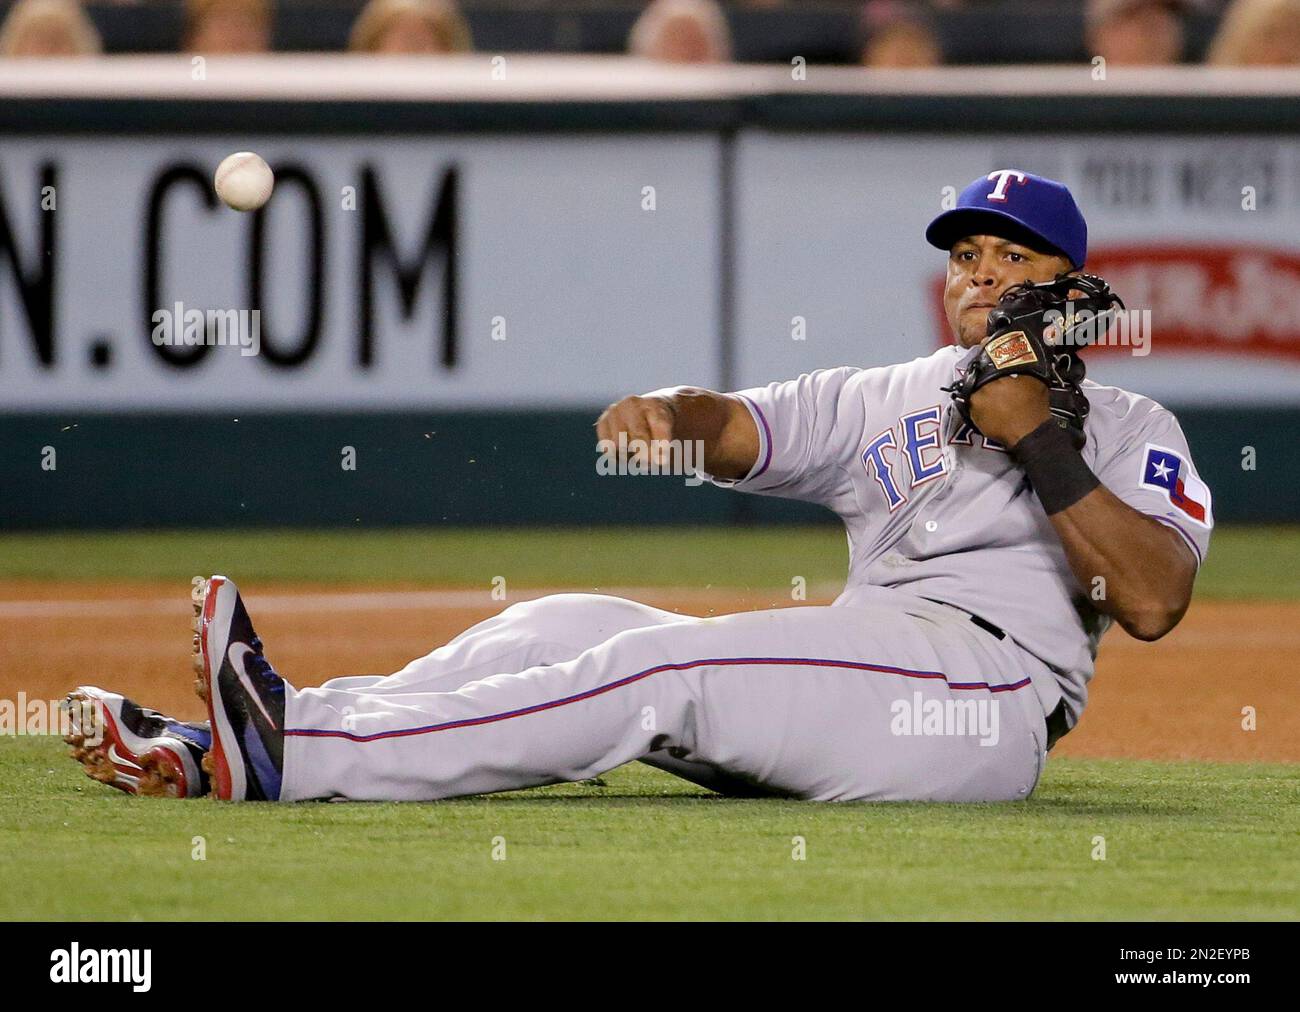 Texas Rangers third baseman Adrian Beltre fails to throw out Los Angeles Angels' Collin Cowgill at first during the fourth inning of a baseball game in Anaheim, Calif., Friday, April 24, 2015. (AP Photo/Chris Carlson) Stock Photo